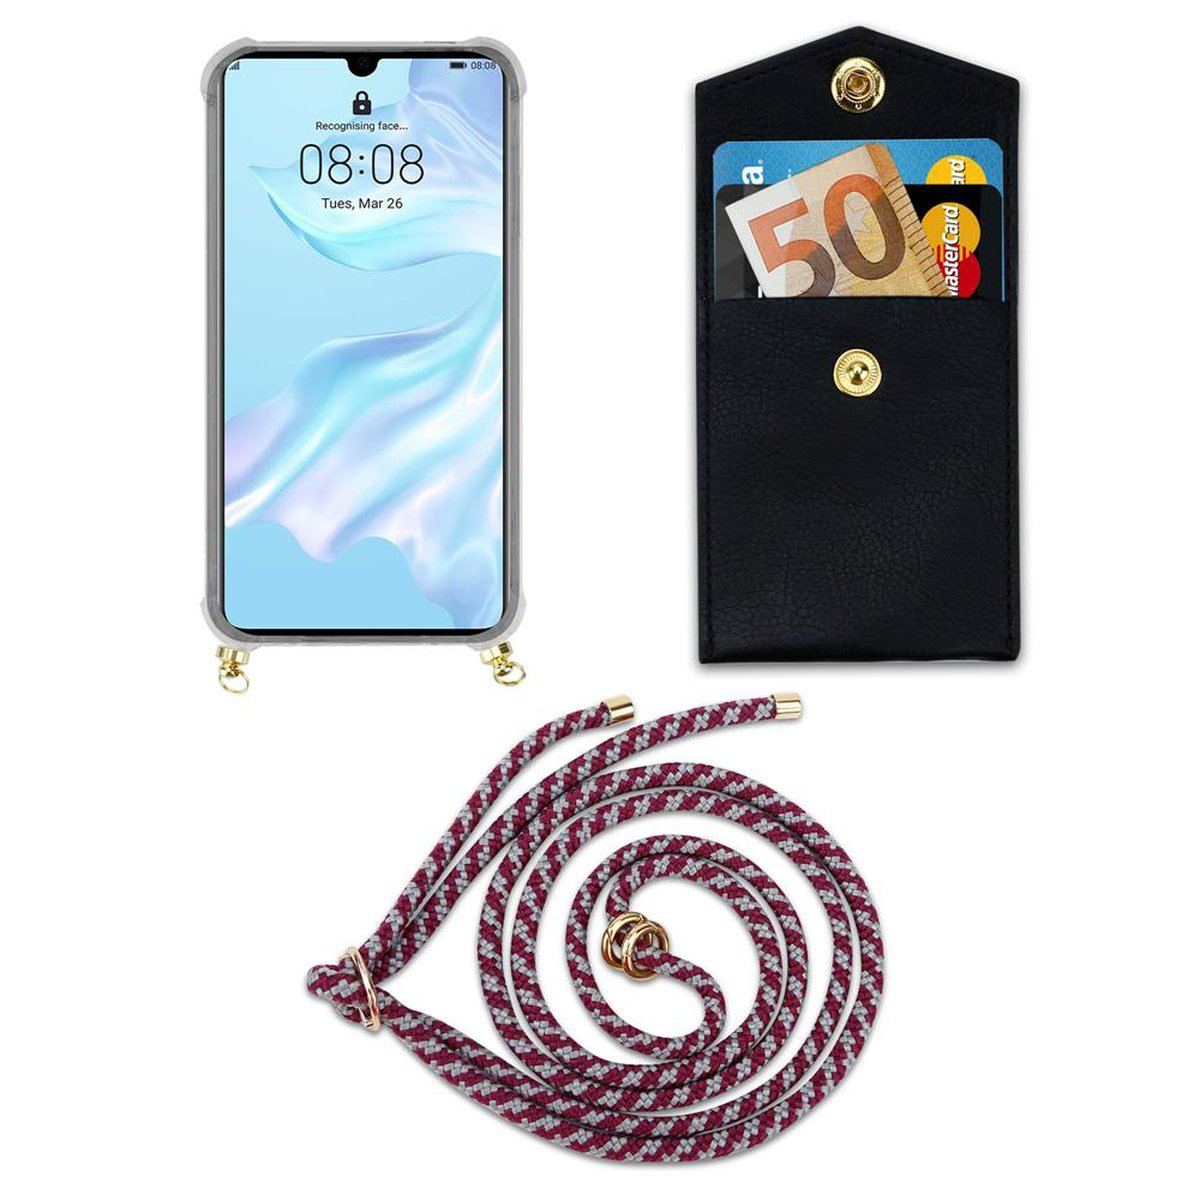 CADORABO Handy Kette mit WEIß und Hülle, Kordel Huawei, Backcover, Gold Ringen, Band ROT P30, abnehmbarer